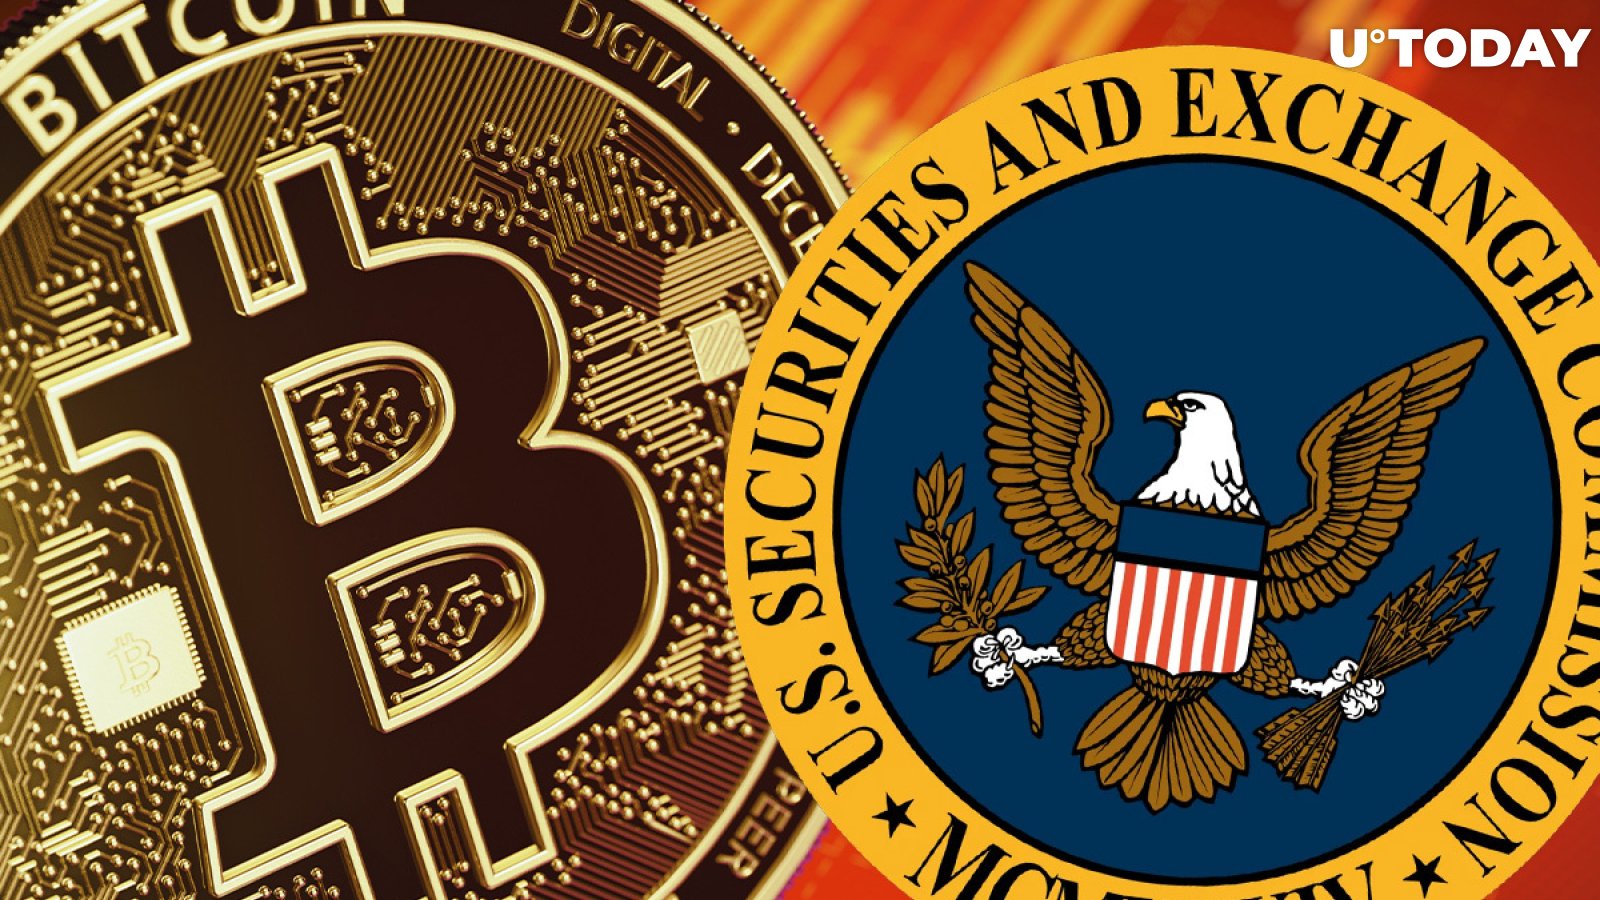 SEC Chairman Gensler Calls Bitcoin and Other Coins Speculative Asset Class